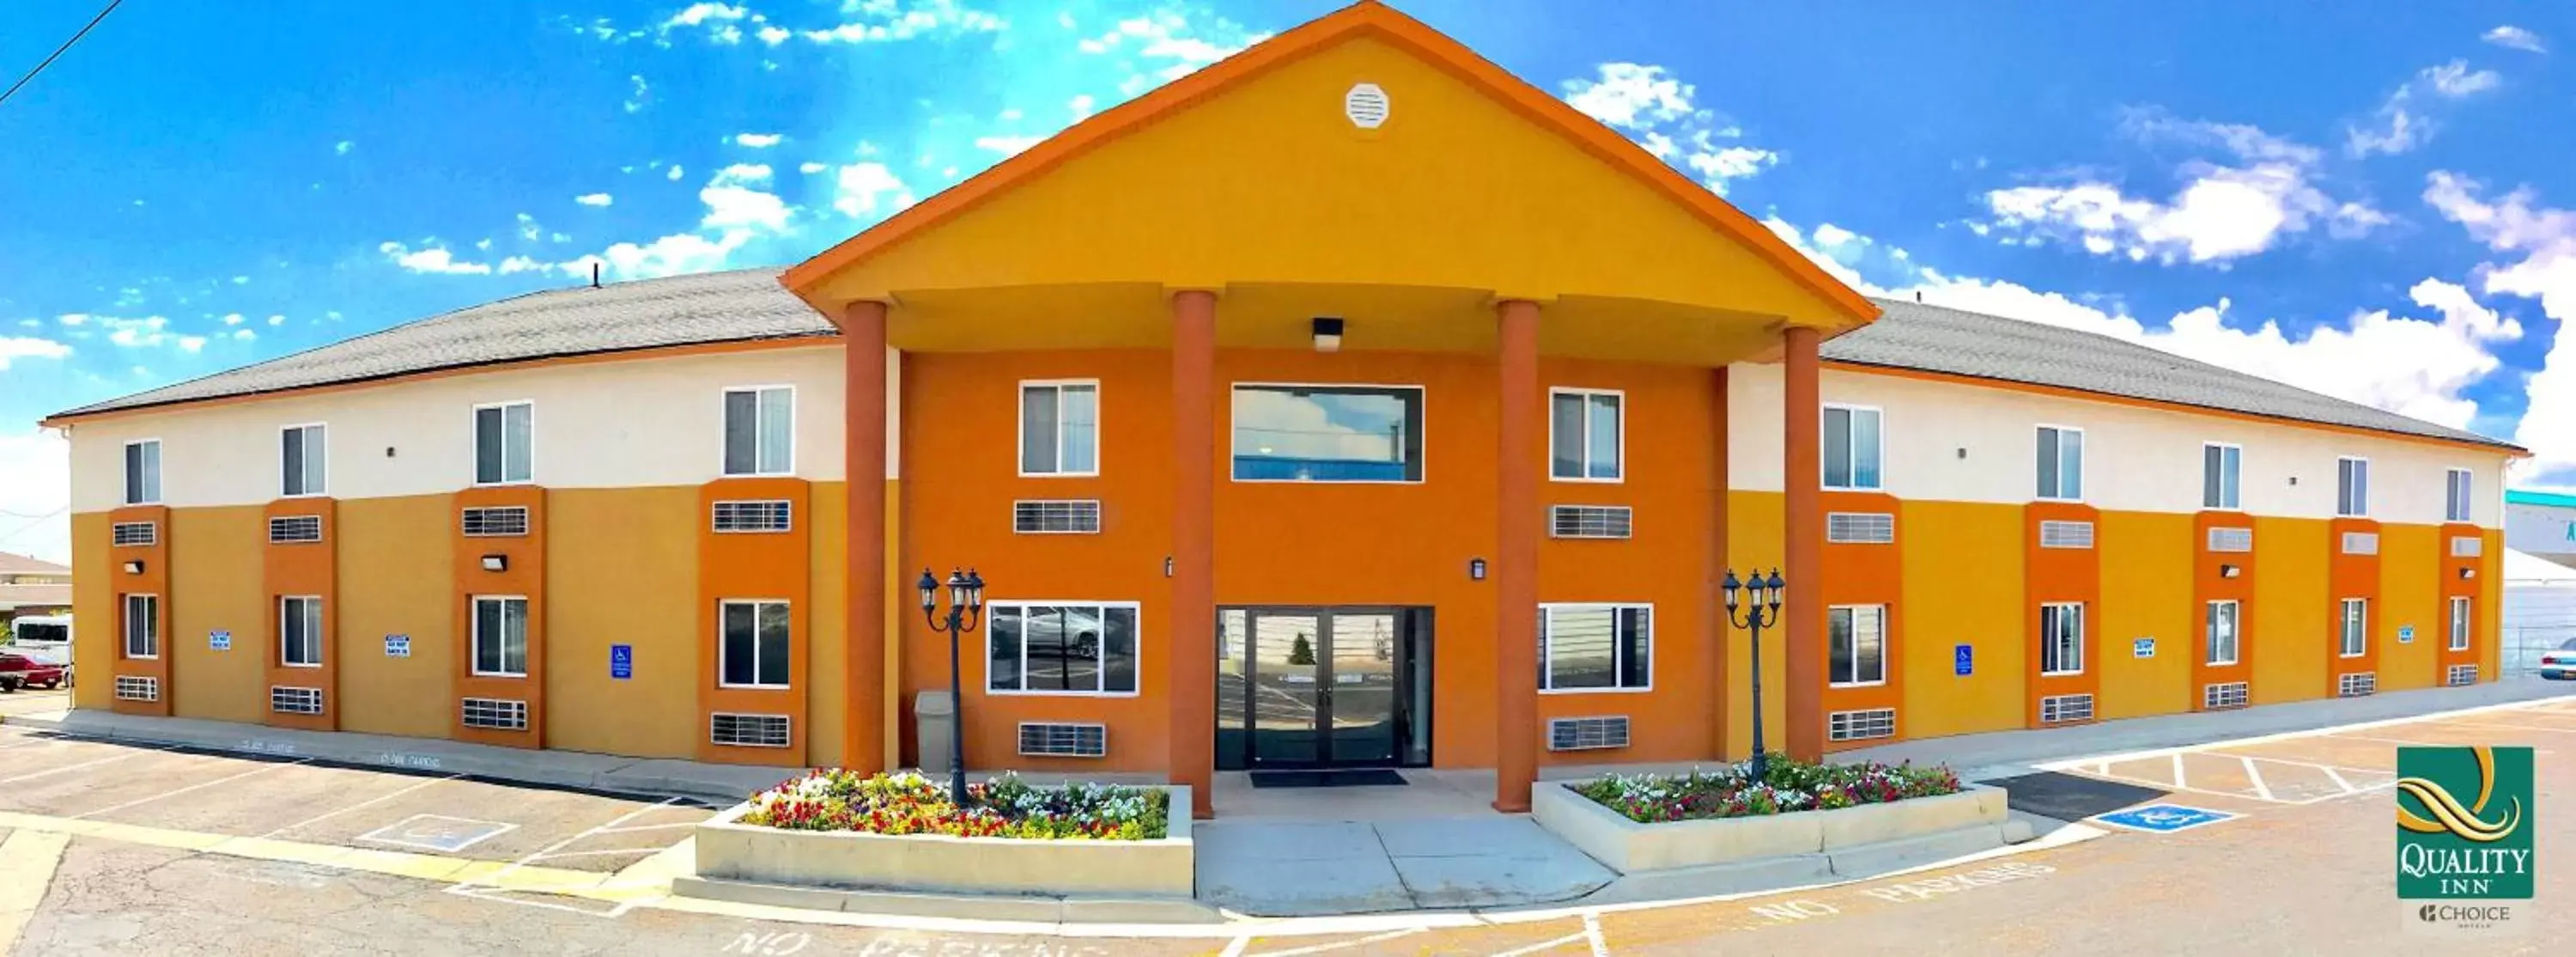 Property Building in Quality Inn Price Gateway to Moab National Parks